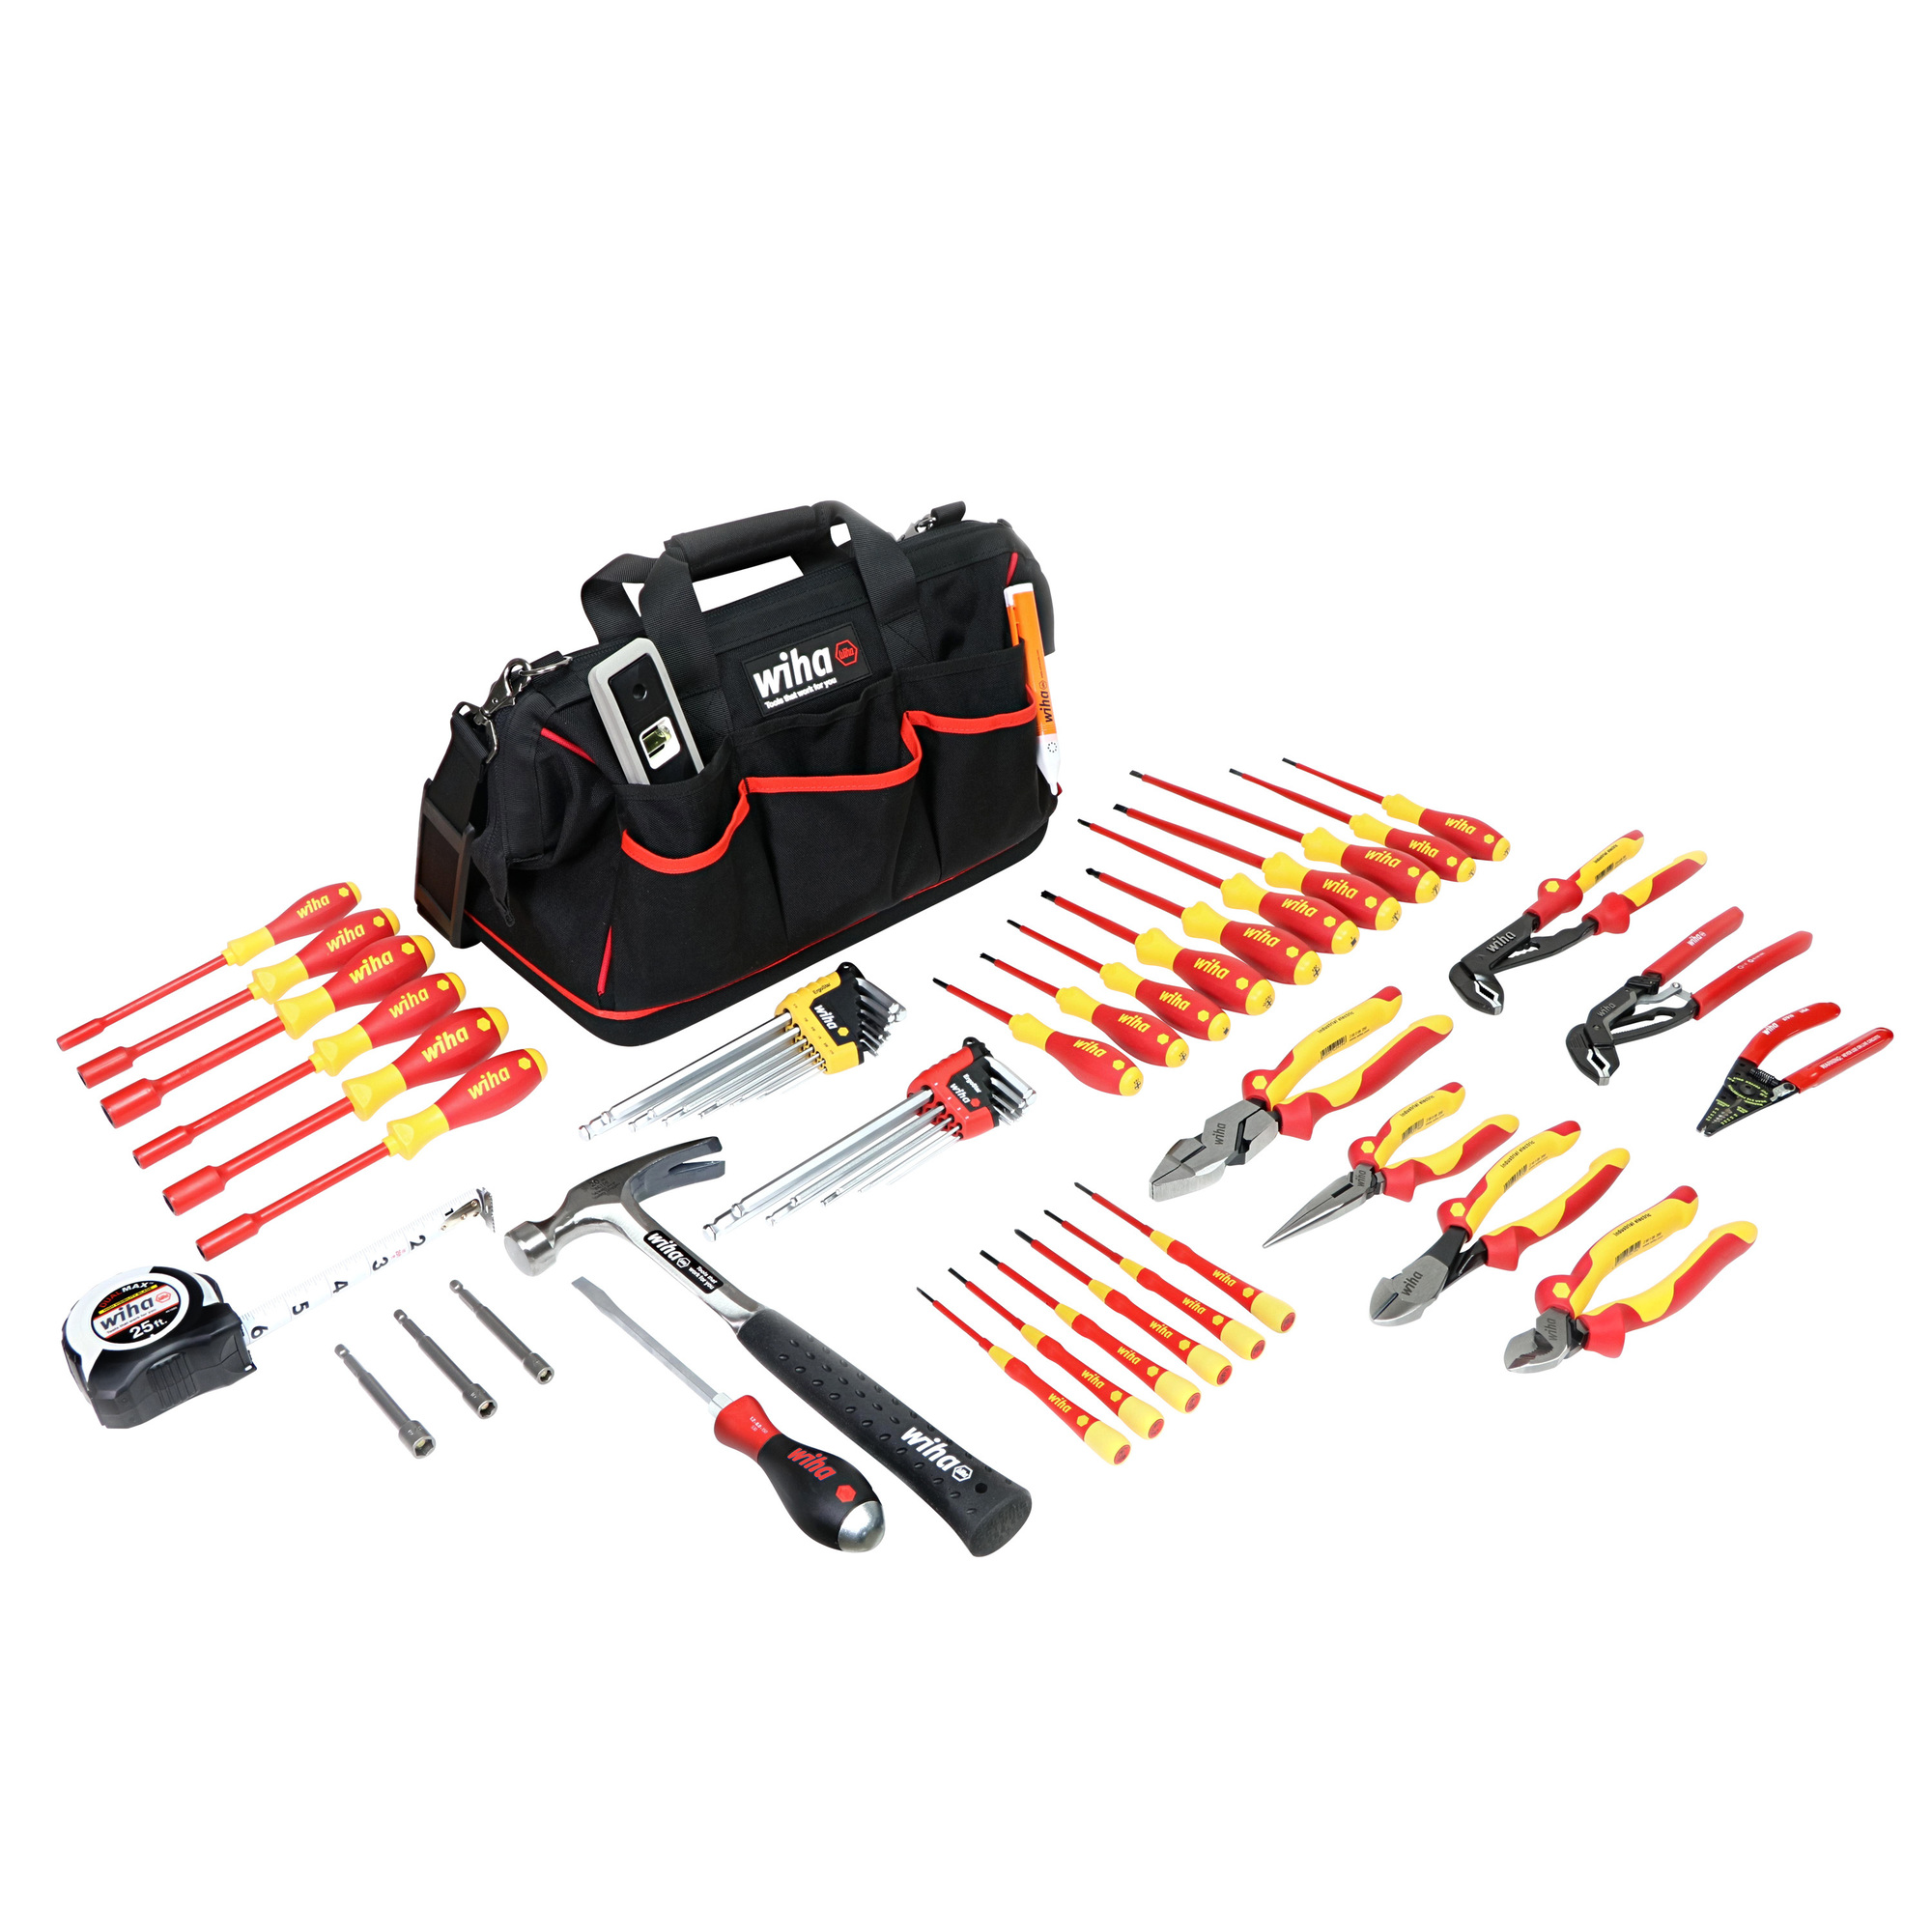 Wiha, 59 Piece Master Electrician's Tool Set With Bag, Pieces (qty.) 60, Model 32937